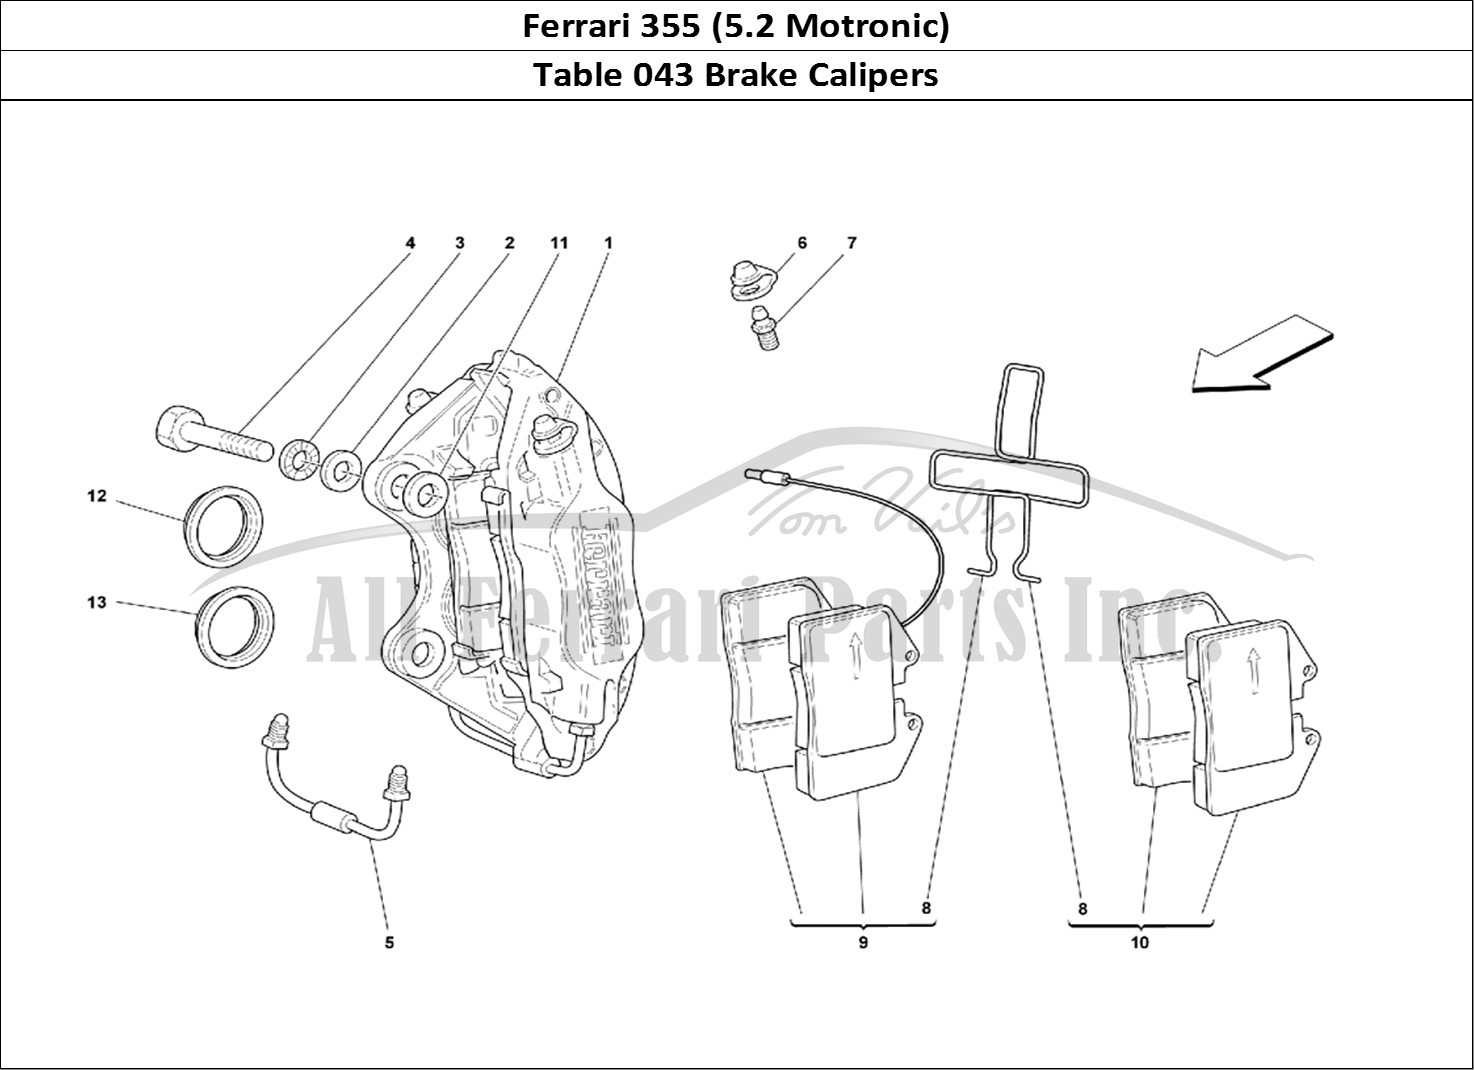 Ferrari Parts Ferrari 355 (5.2 Motronic) Page 043 Calipers for Front and Re